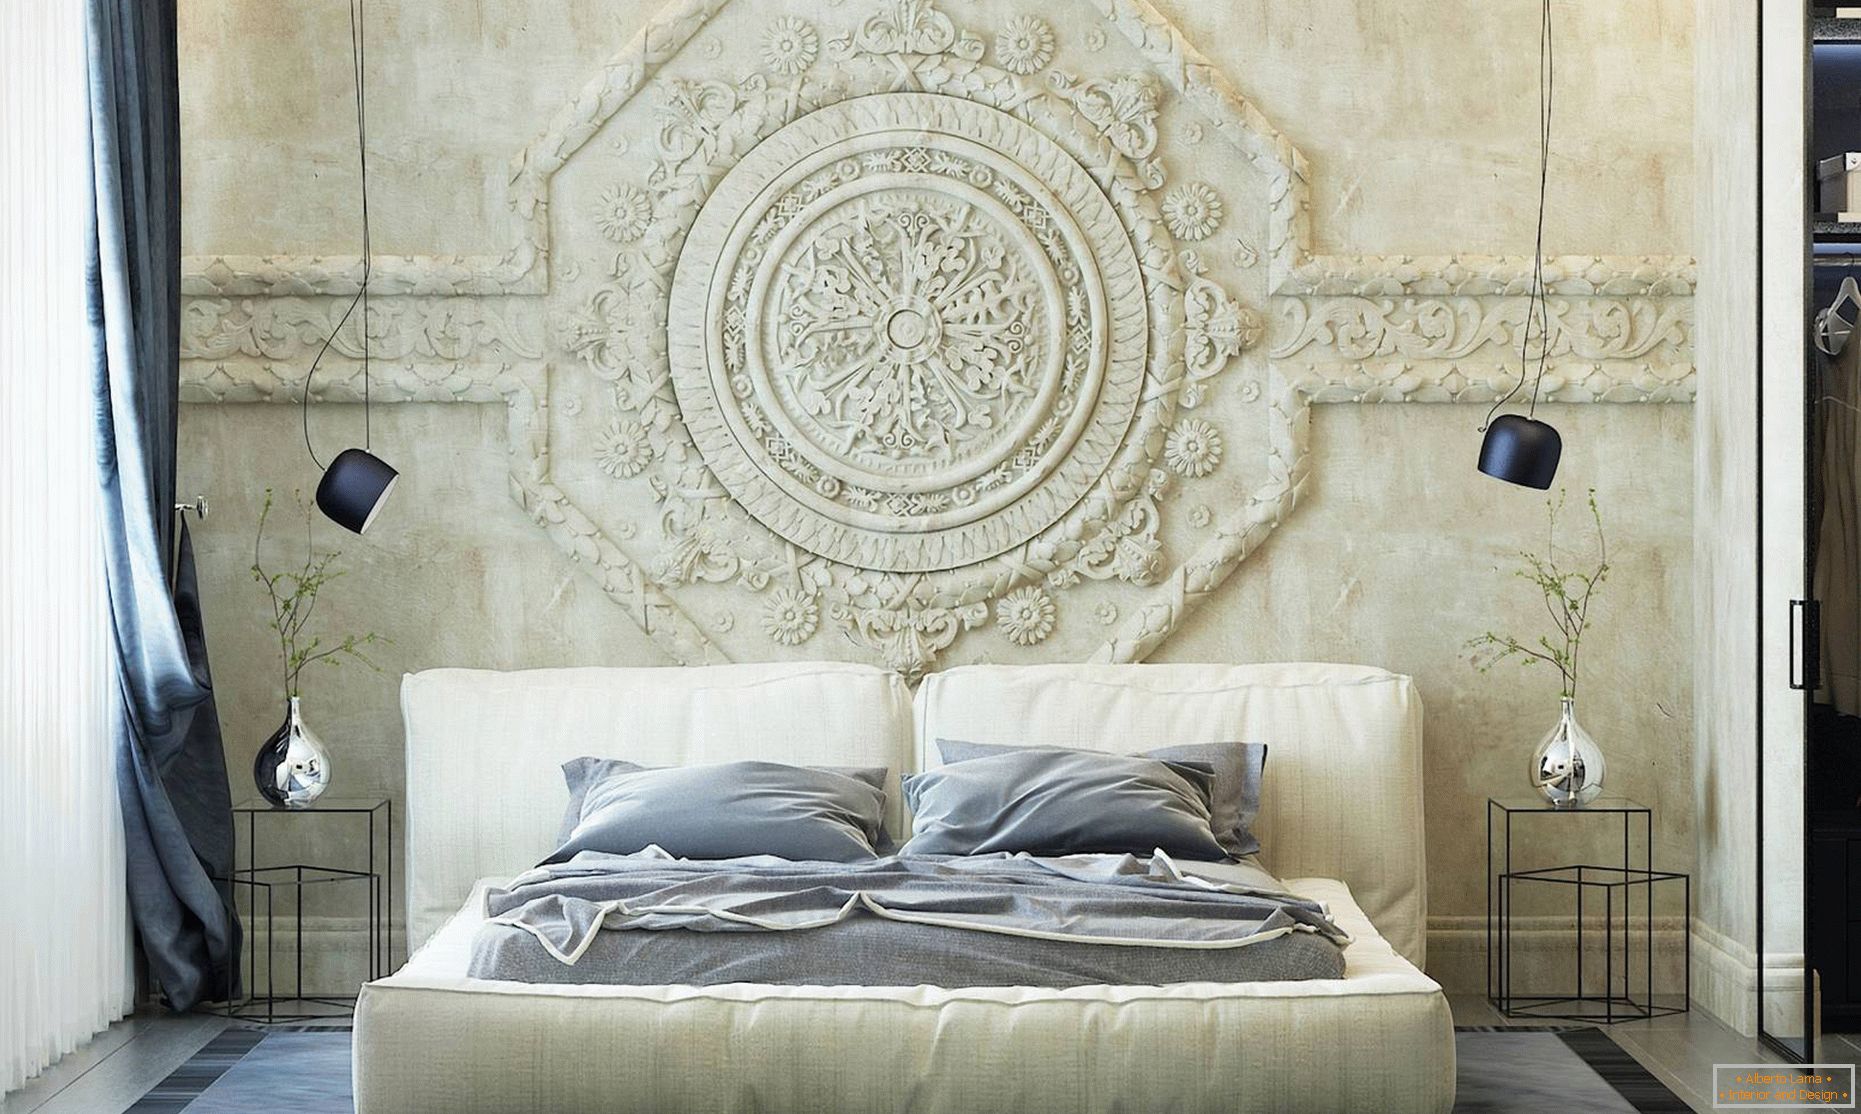 Bas-relief over a double bed